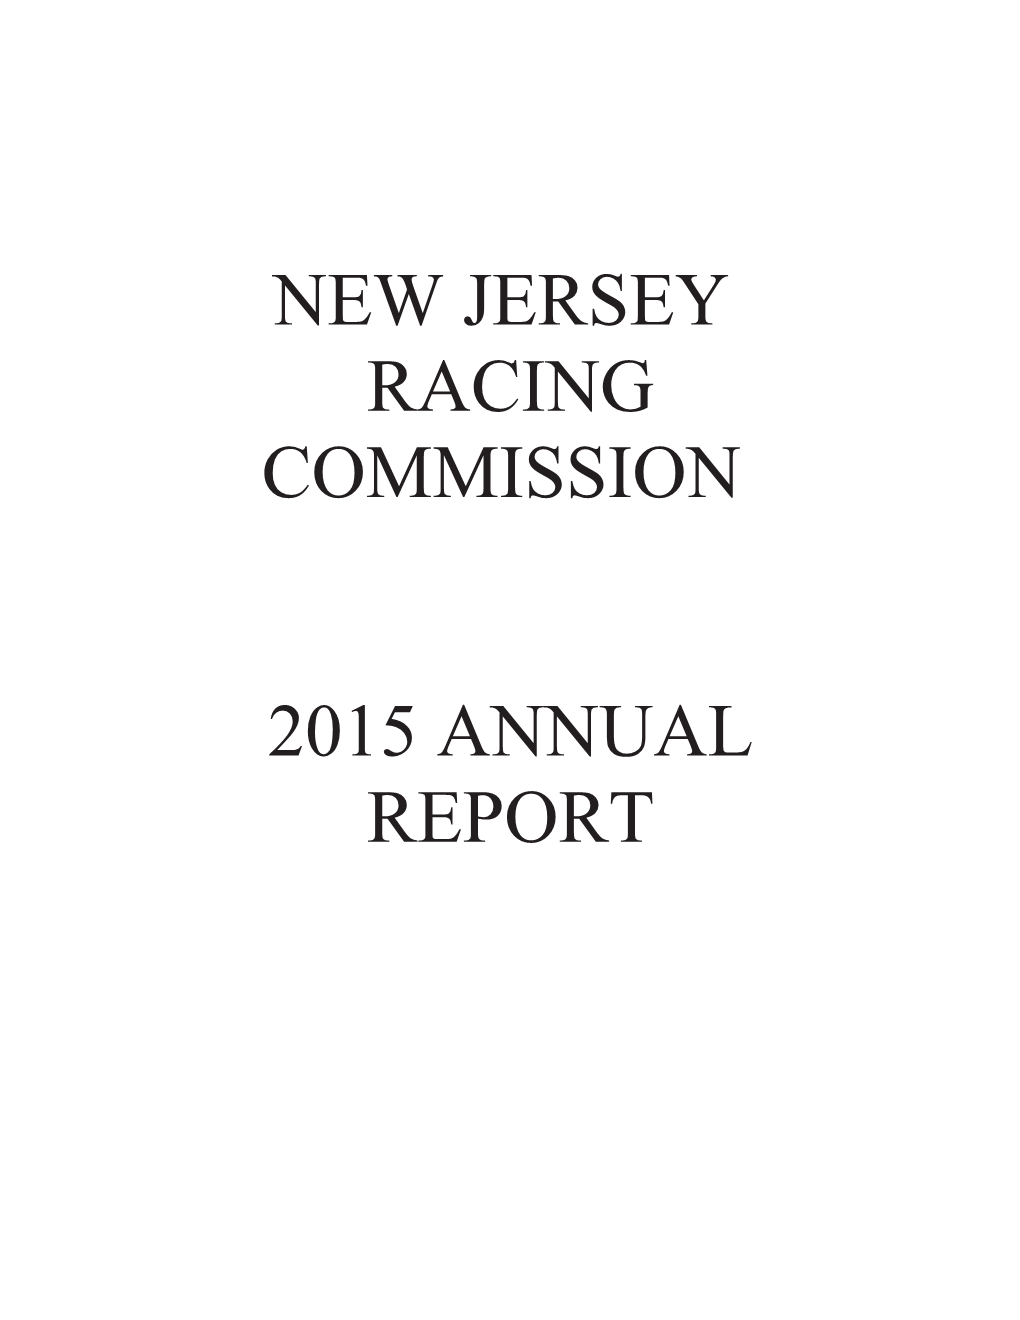 New Jersey Racing Commission 2015 Annual Report